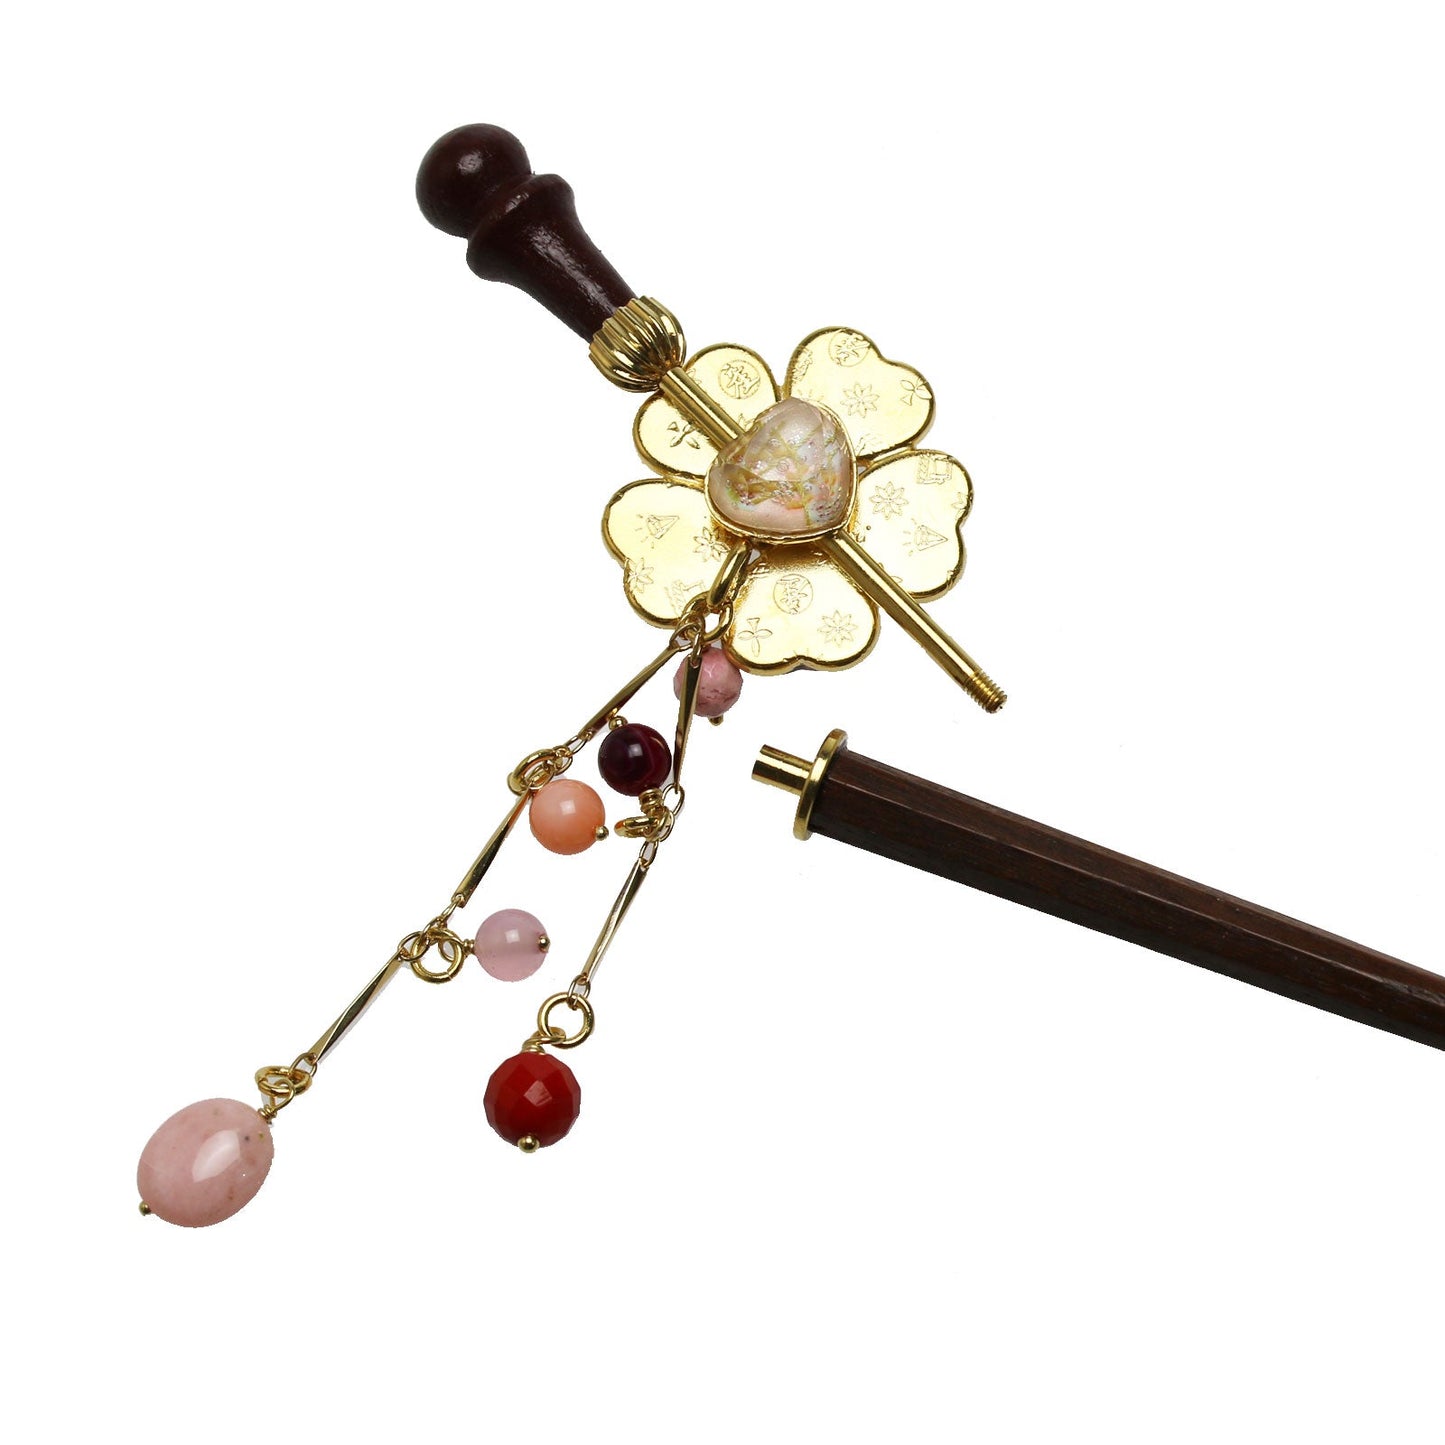 Changeable Ornament Hairpin Pink Flower Wood TAMARUSAN